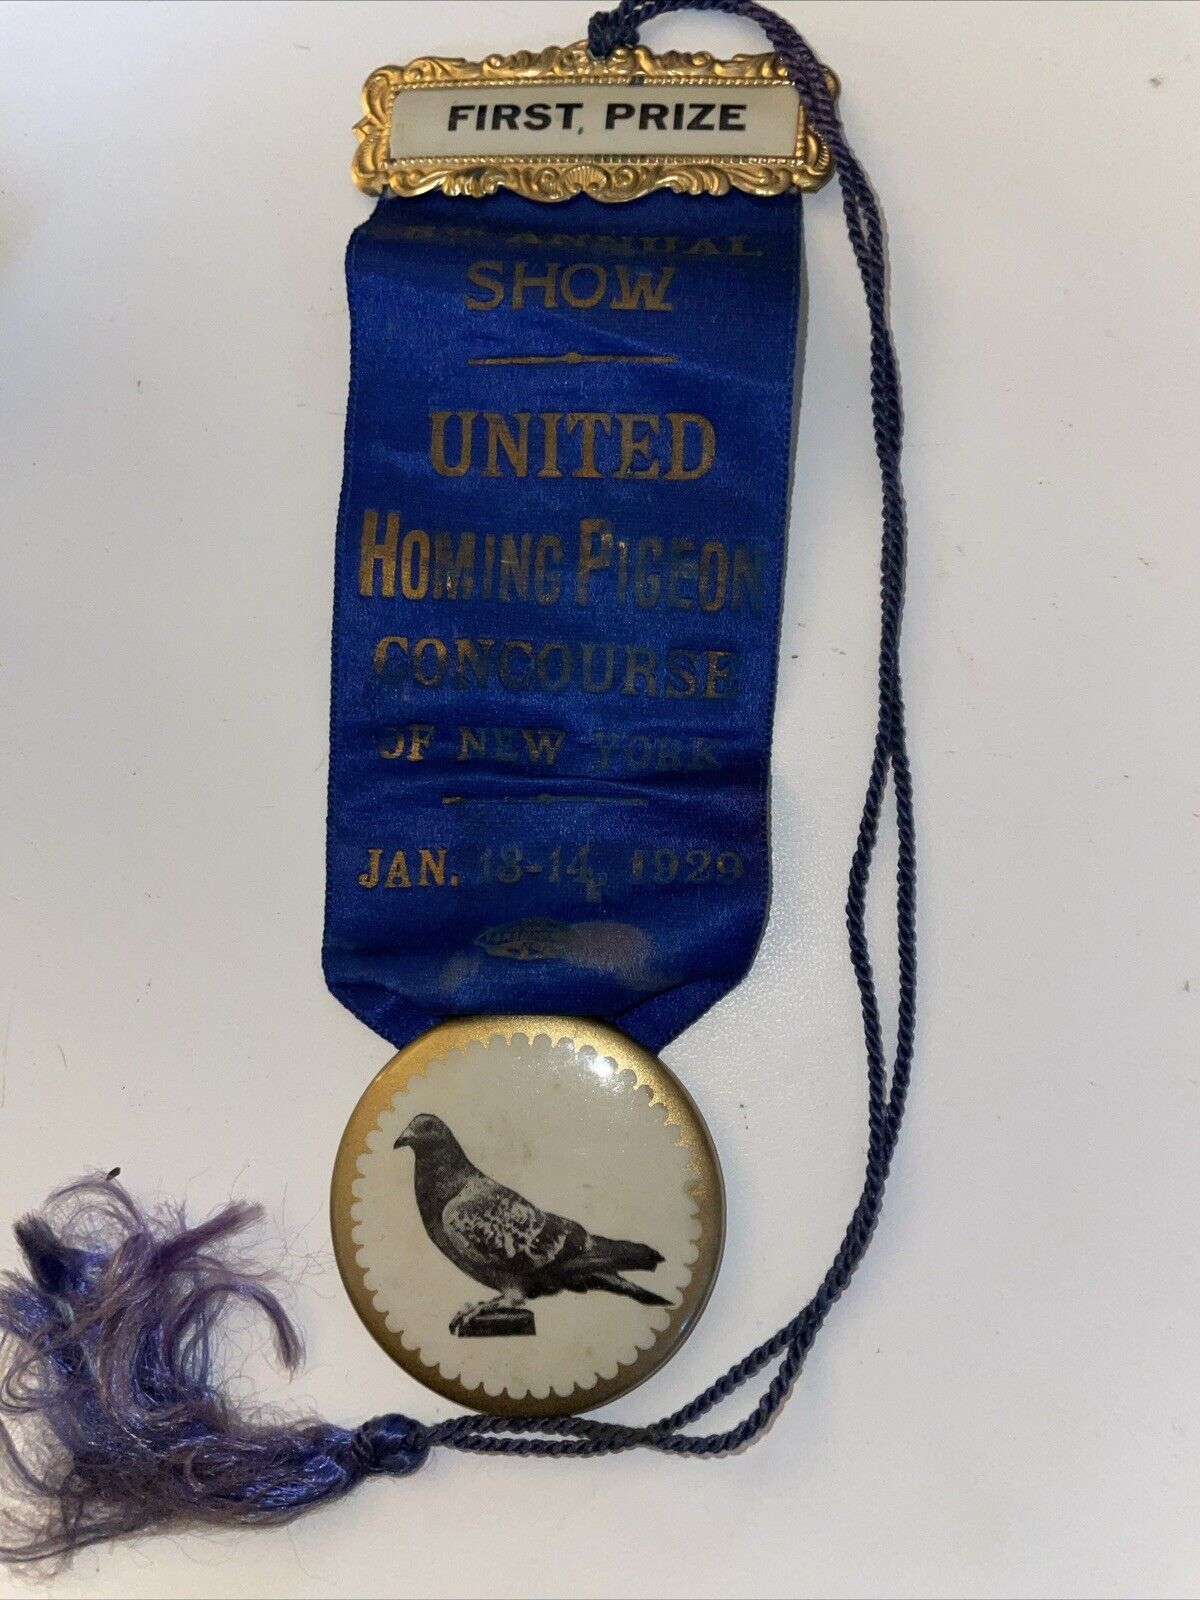 Vintage 1929 Homing Pigeon Concourse 1st Place